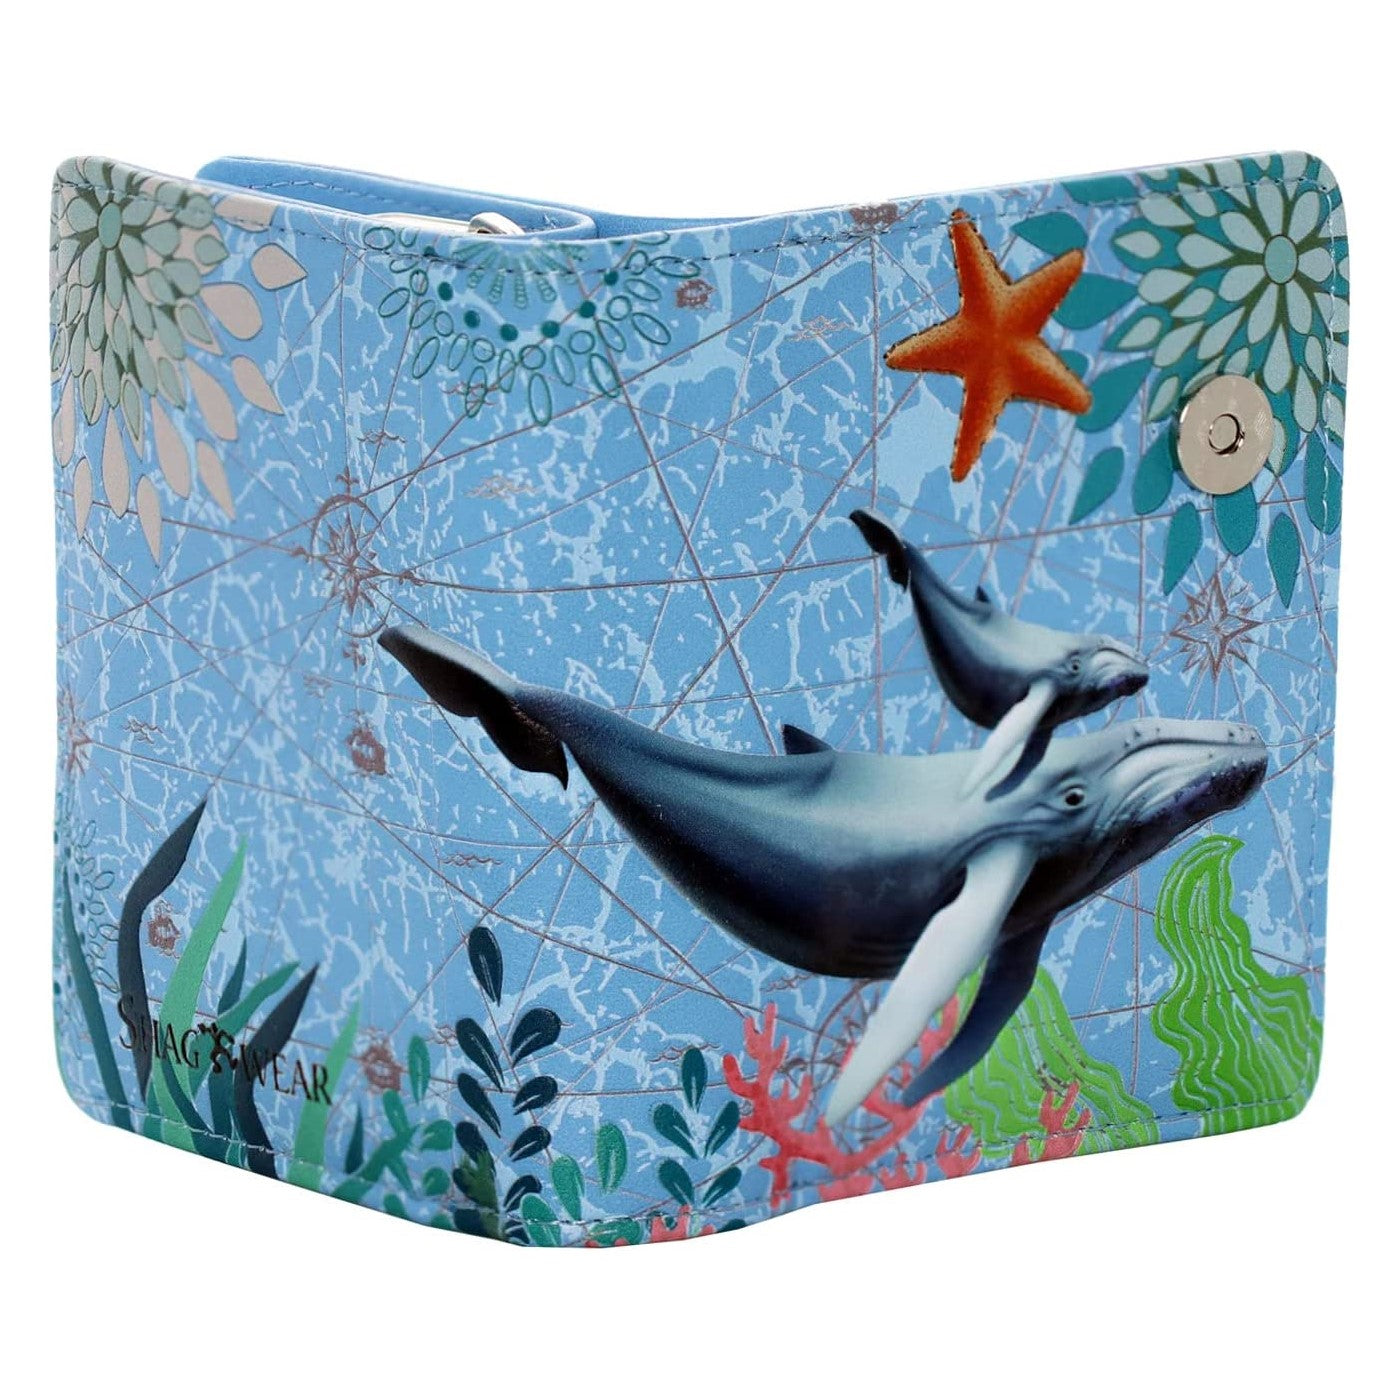 Sky Blue Whale Wallet - Small